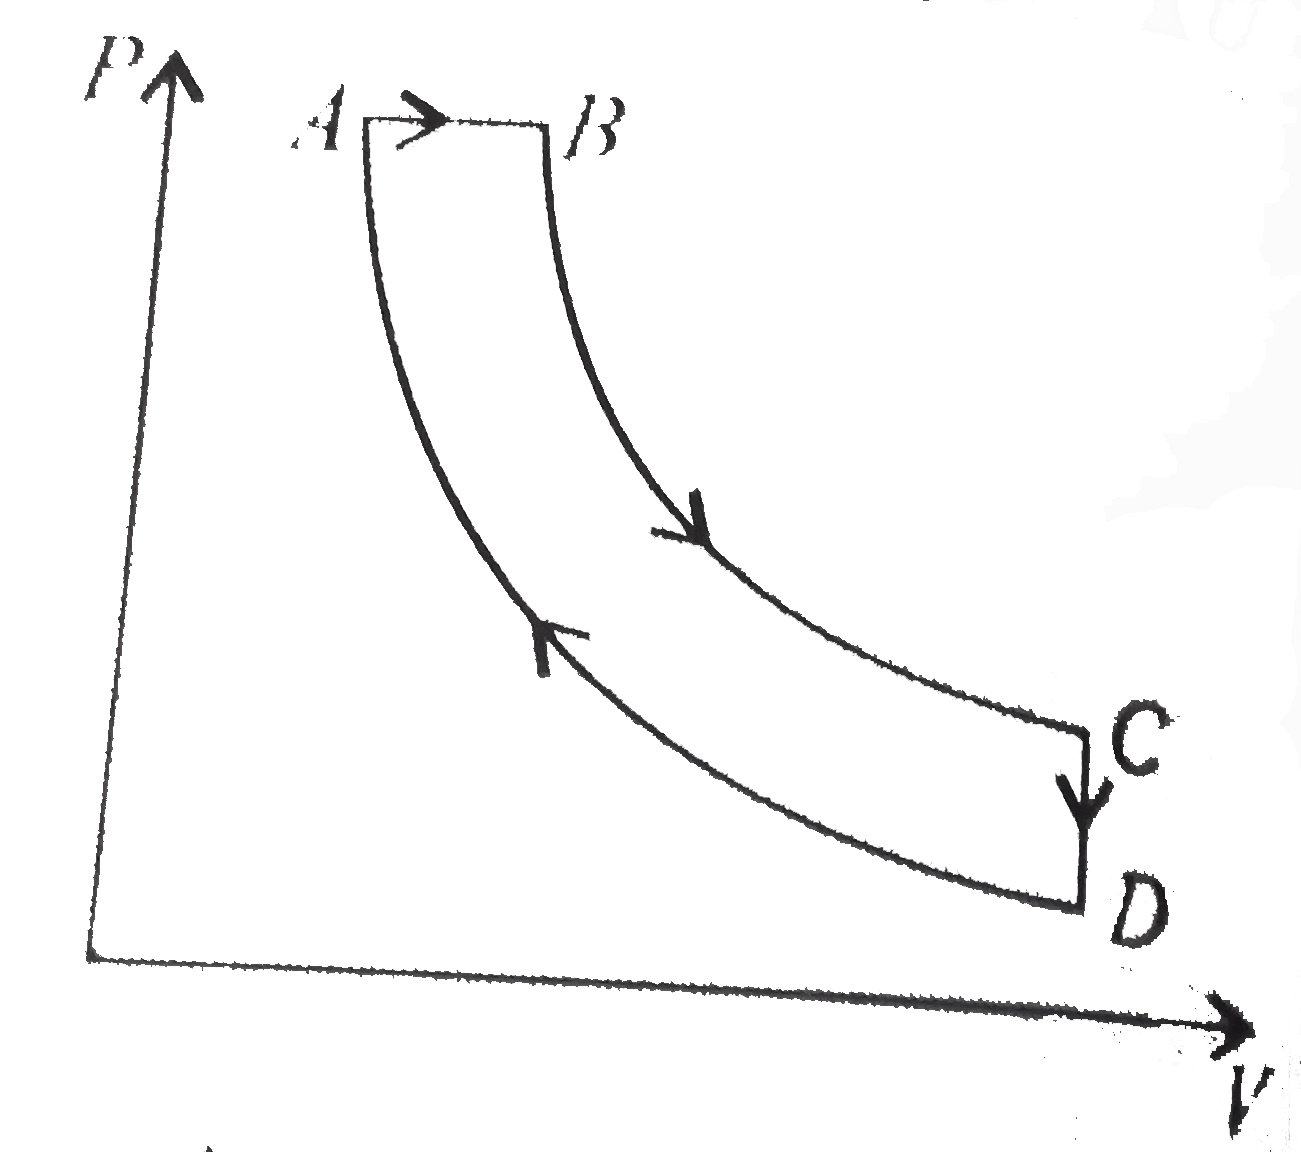 A cyclic process ABCD is shown in the P-V diagram. Which of the following curves represents the same process?